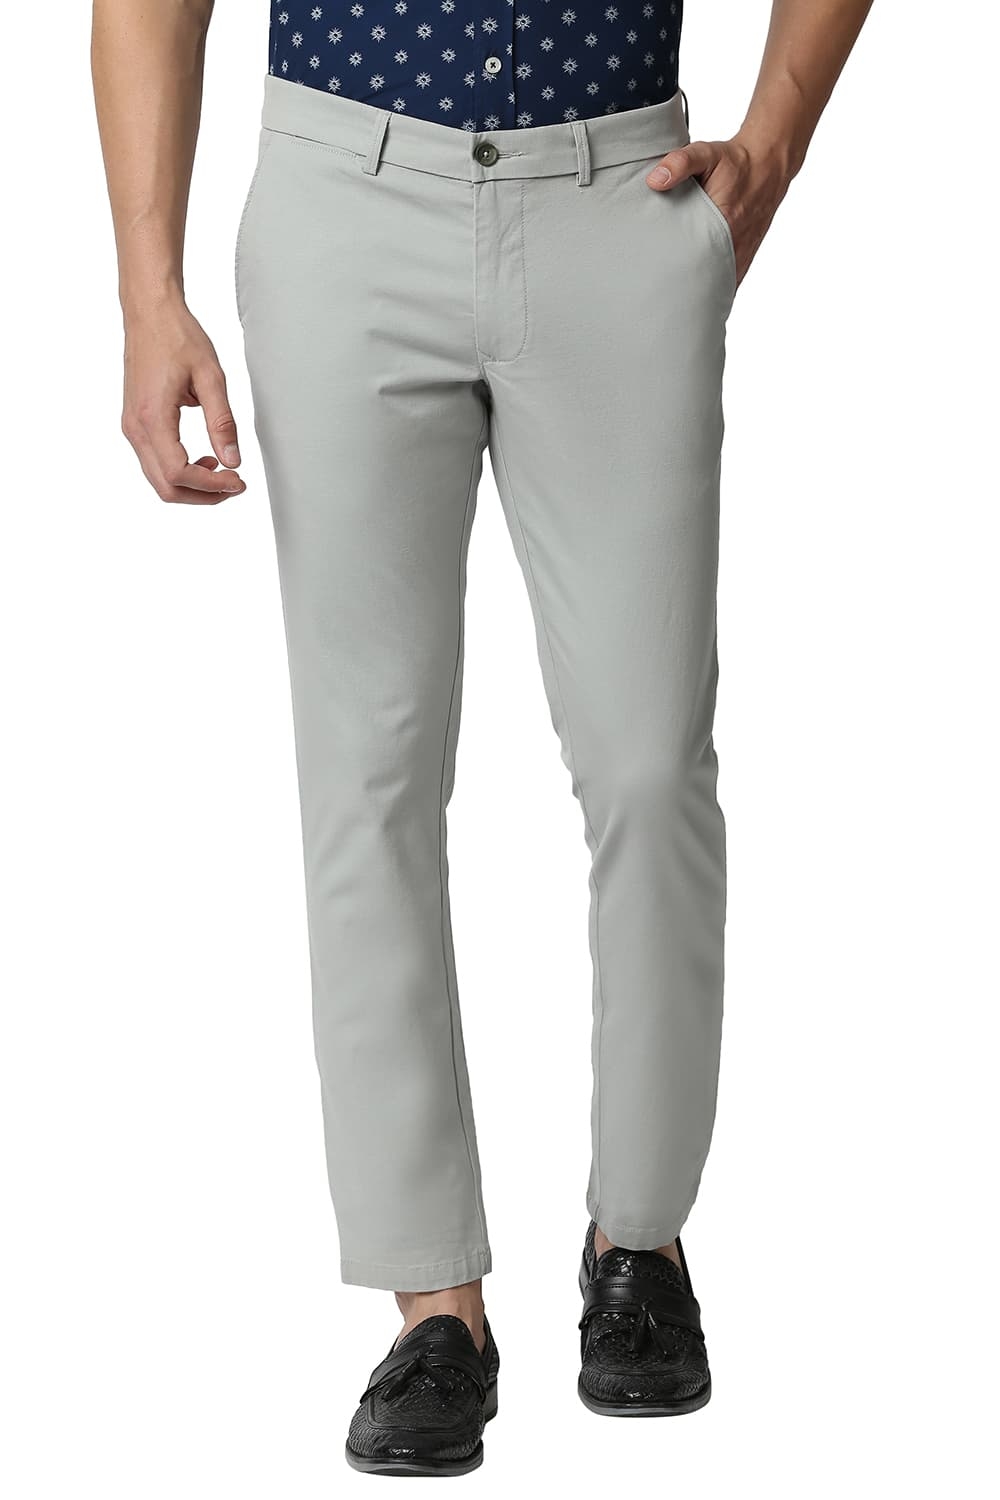 BASICS CASUAL SELF LIGHT GREEN COTTON STRETCH TAPERED TROUSERS 